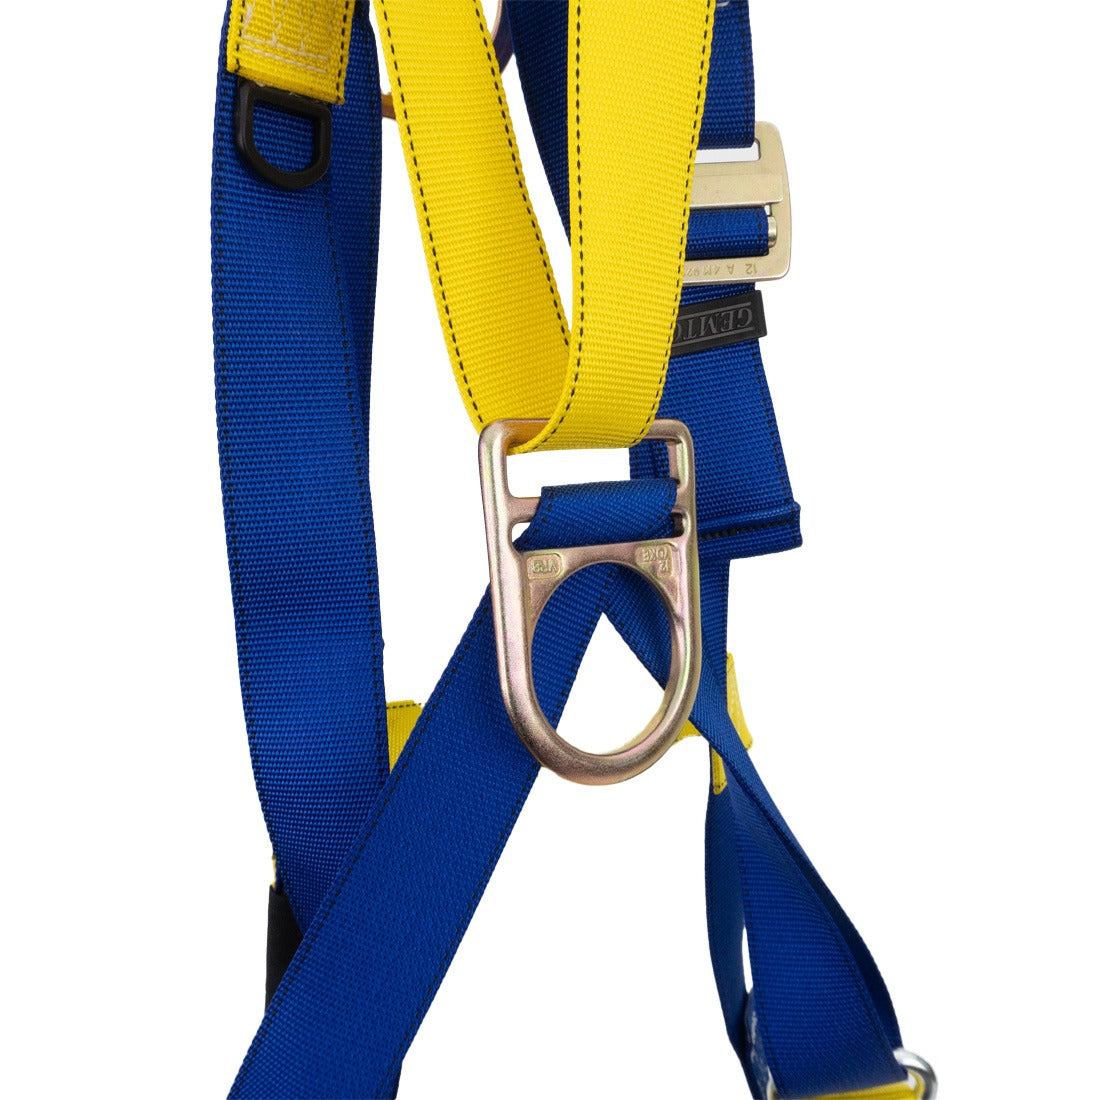 Gemtor Full Body Vest Universal Harness 833-2 - Tongue Buckles Back View